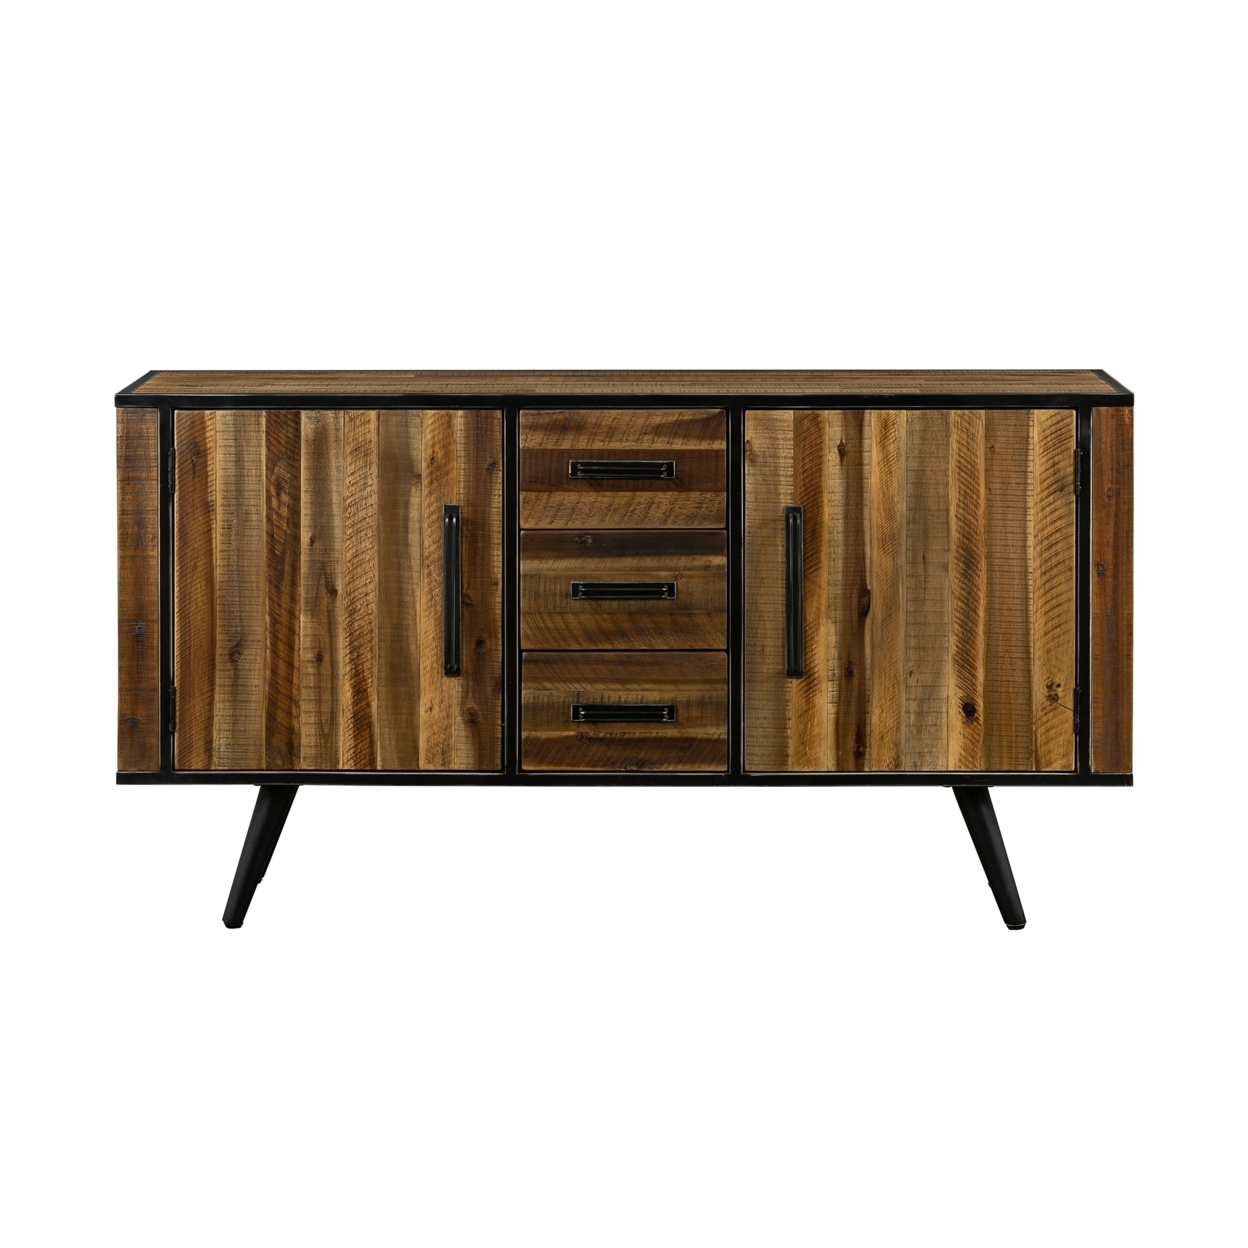 57 Inch Buffet Cabinet, Wood, Natural Wood Grain Details, Brown And Black